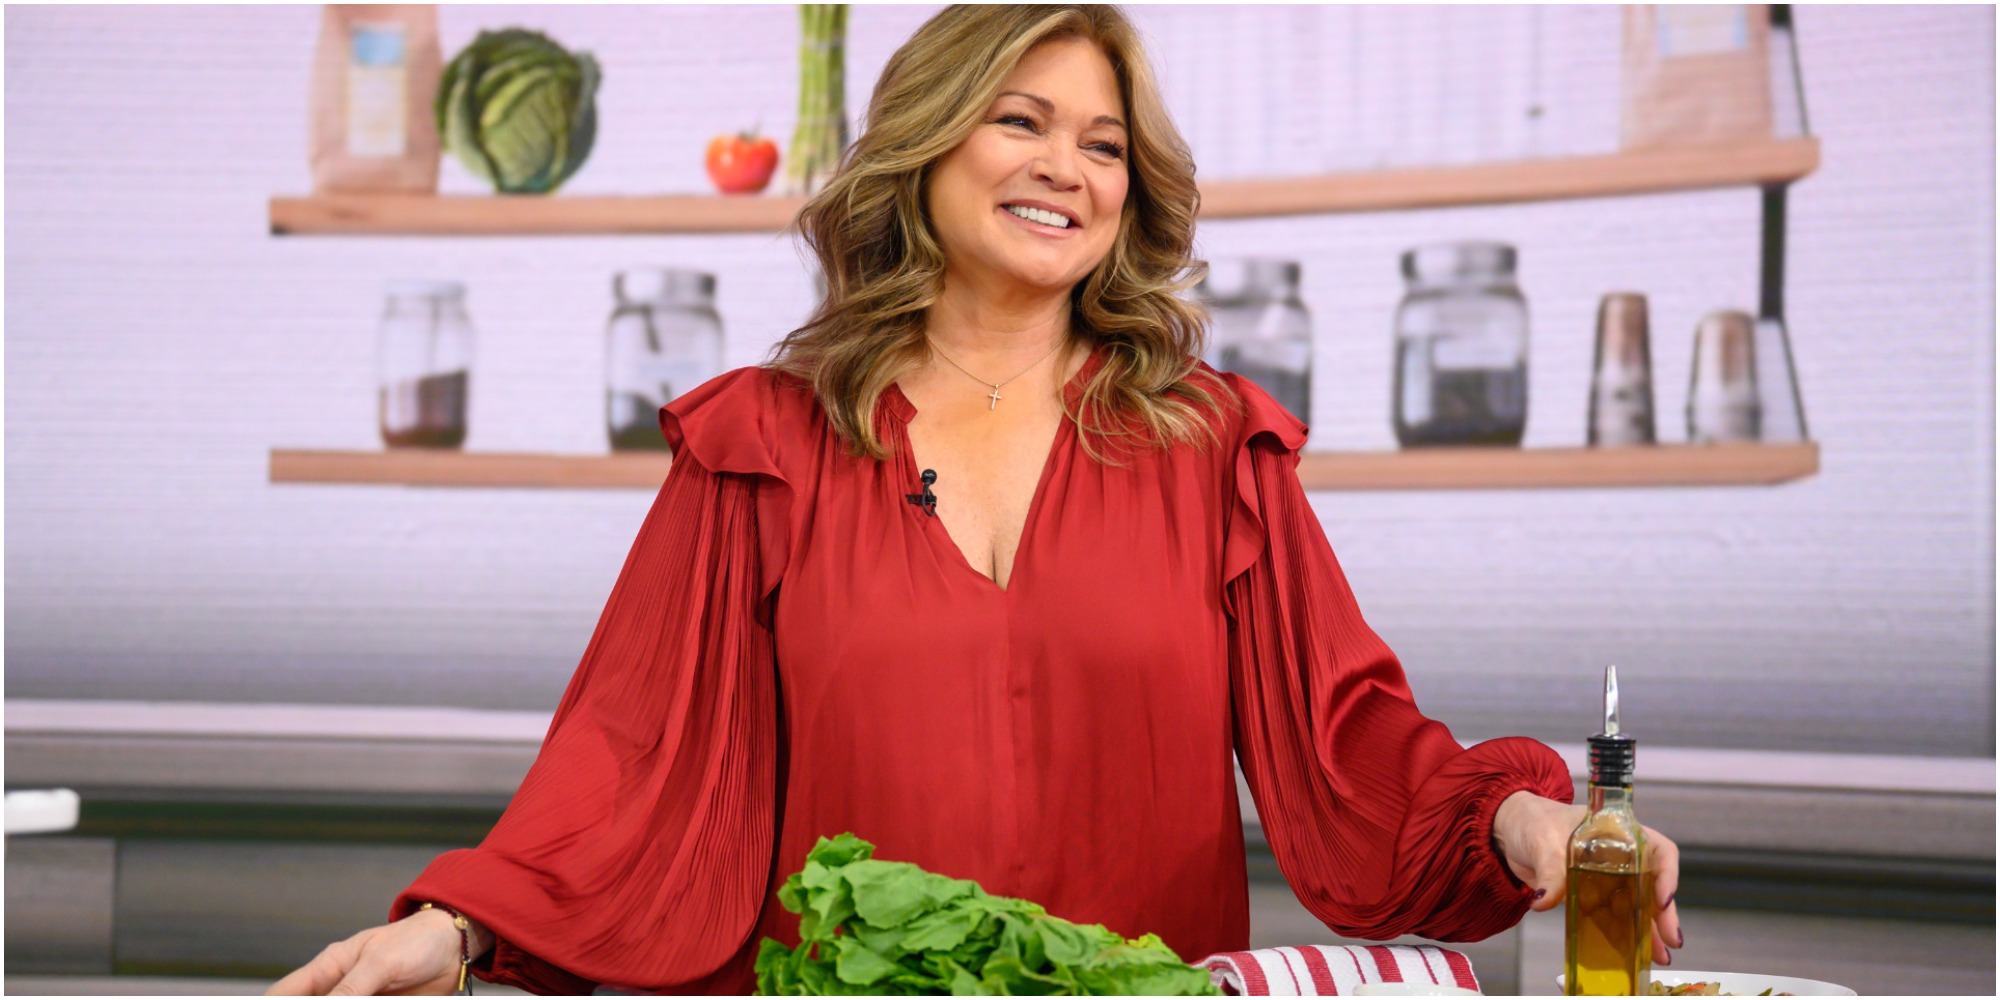 Valerie Bertinelli poses on the set of the Today Show.